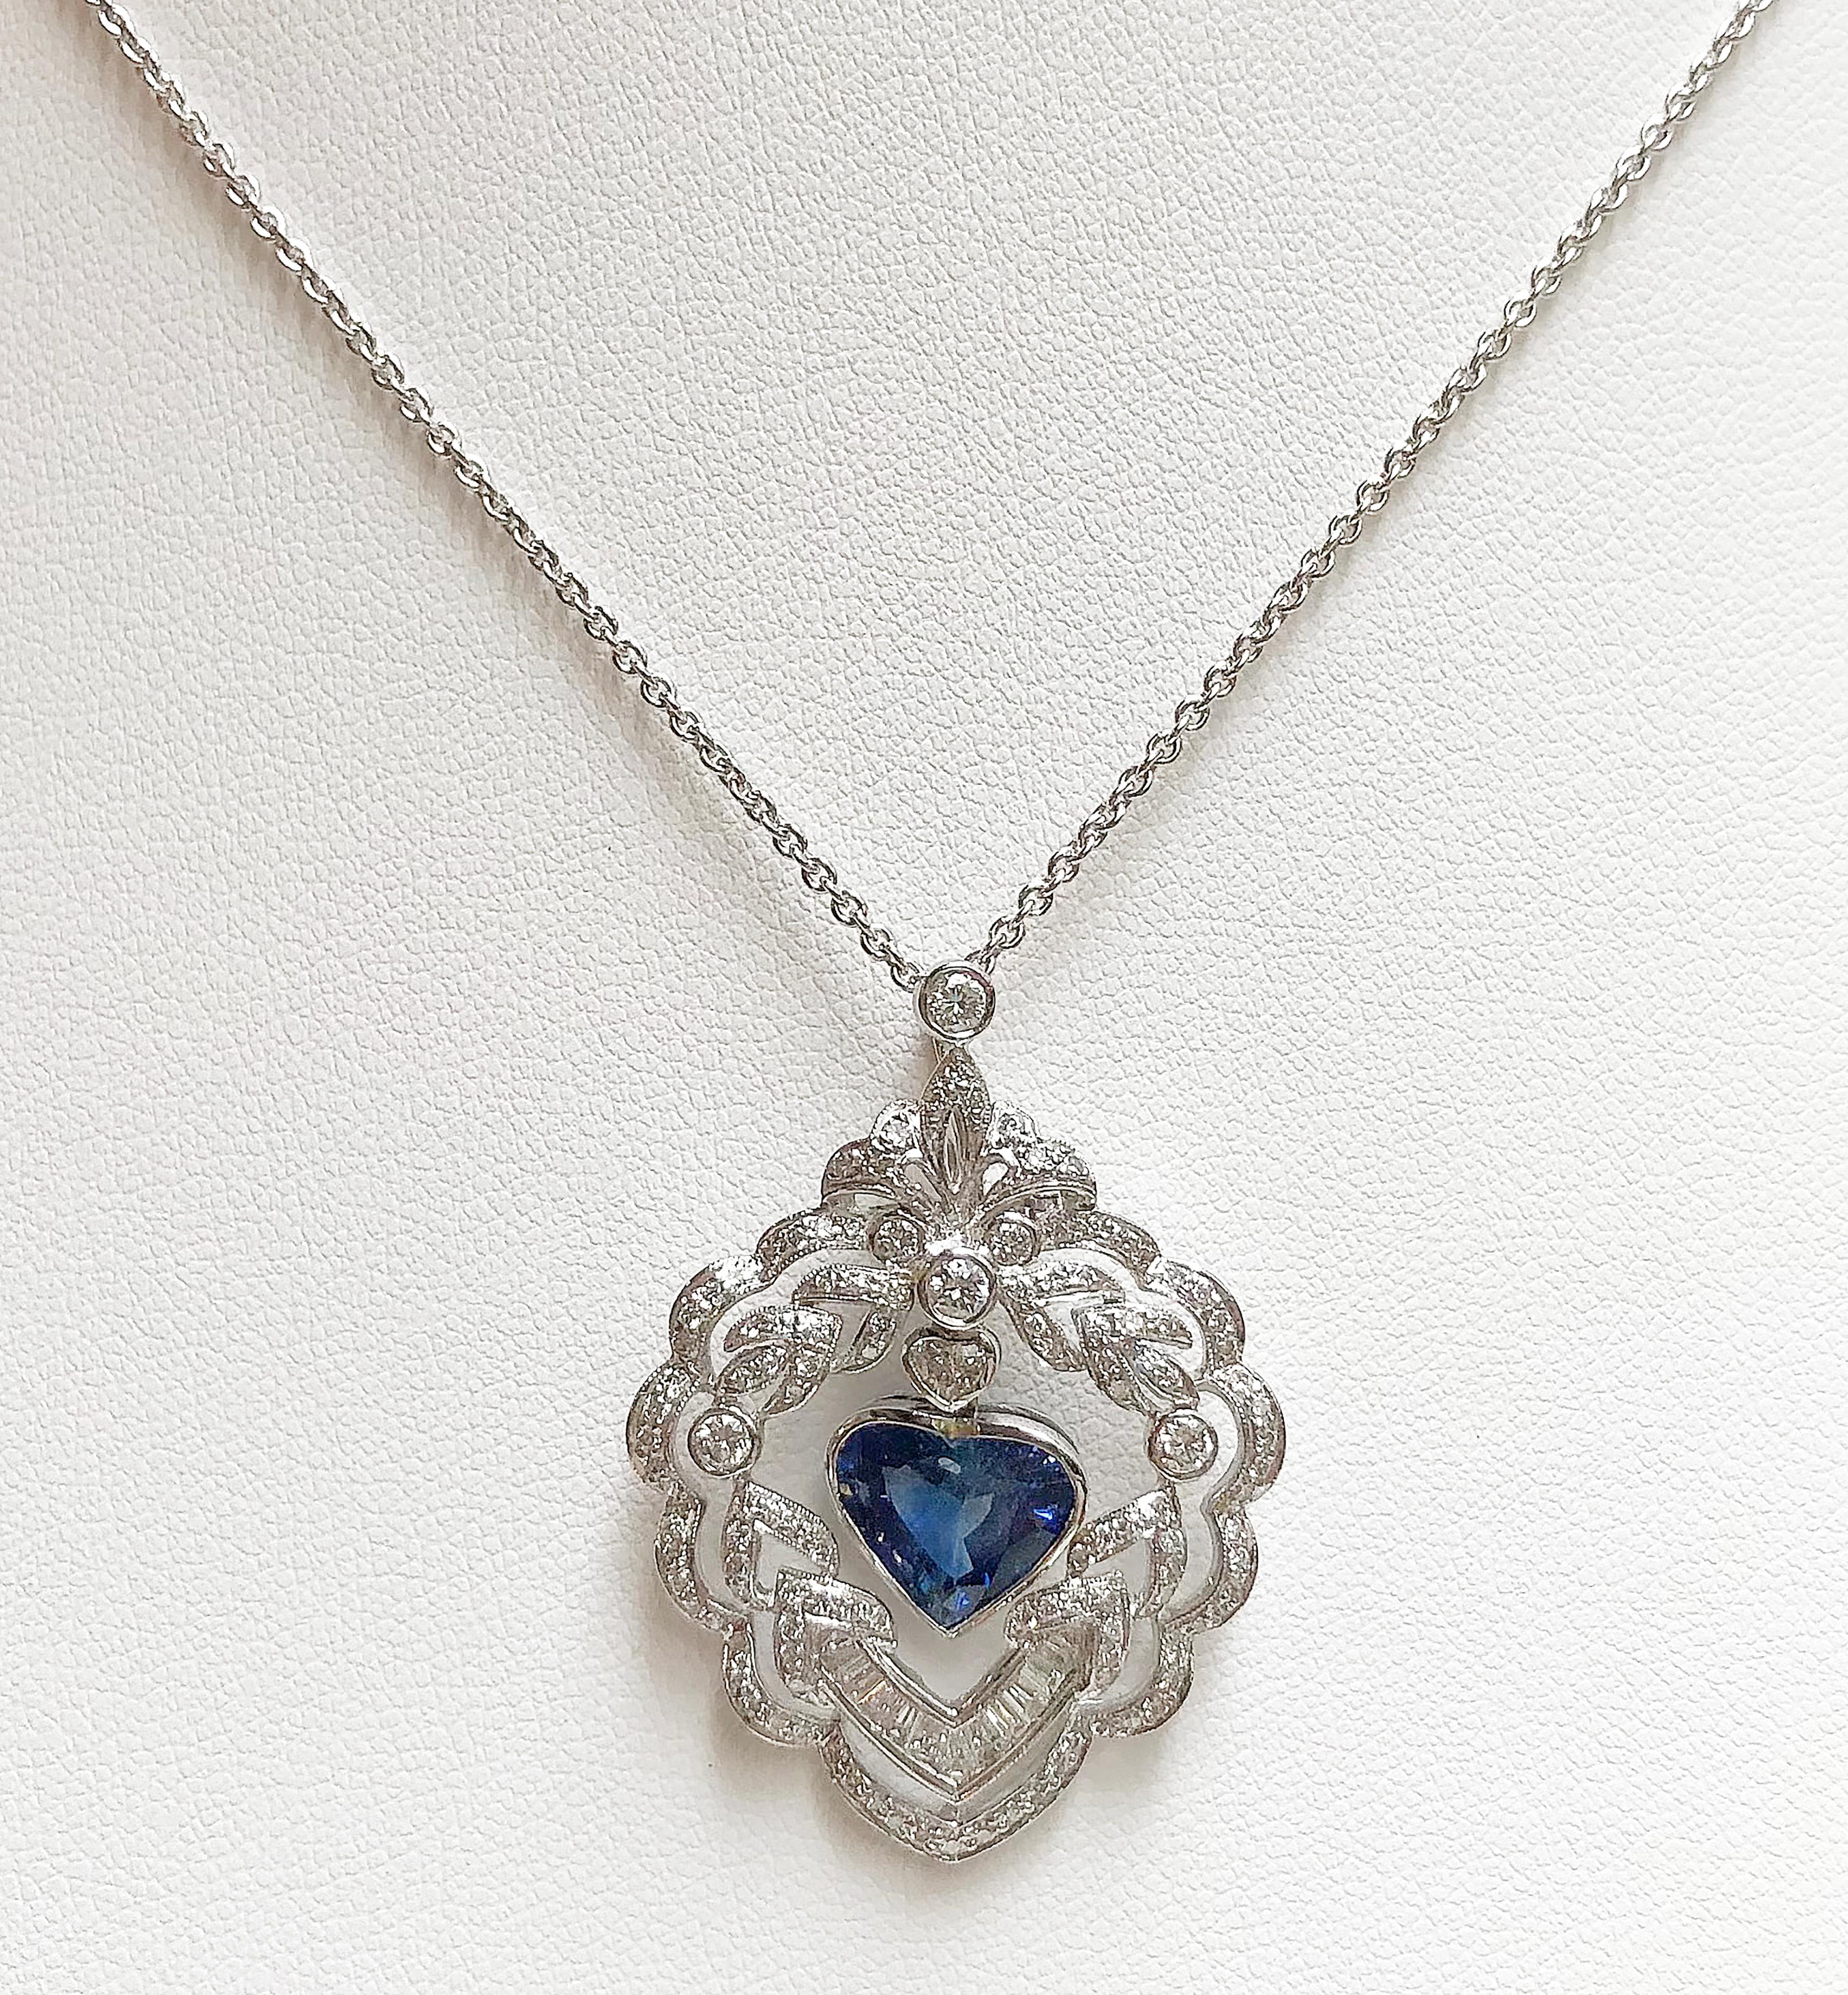 Blue Sapphire 2.98 carats with Diamond 1.25 carats Pendant set in 18 Karat White Gold Settings
(chain not included)

Width:  2.8 cm 
Length: 3.8 cm
Total Weight: 7.37 grams

